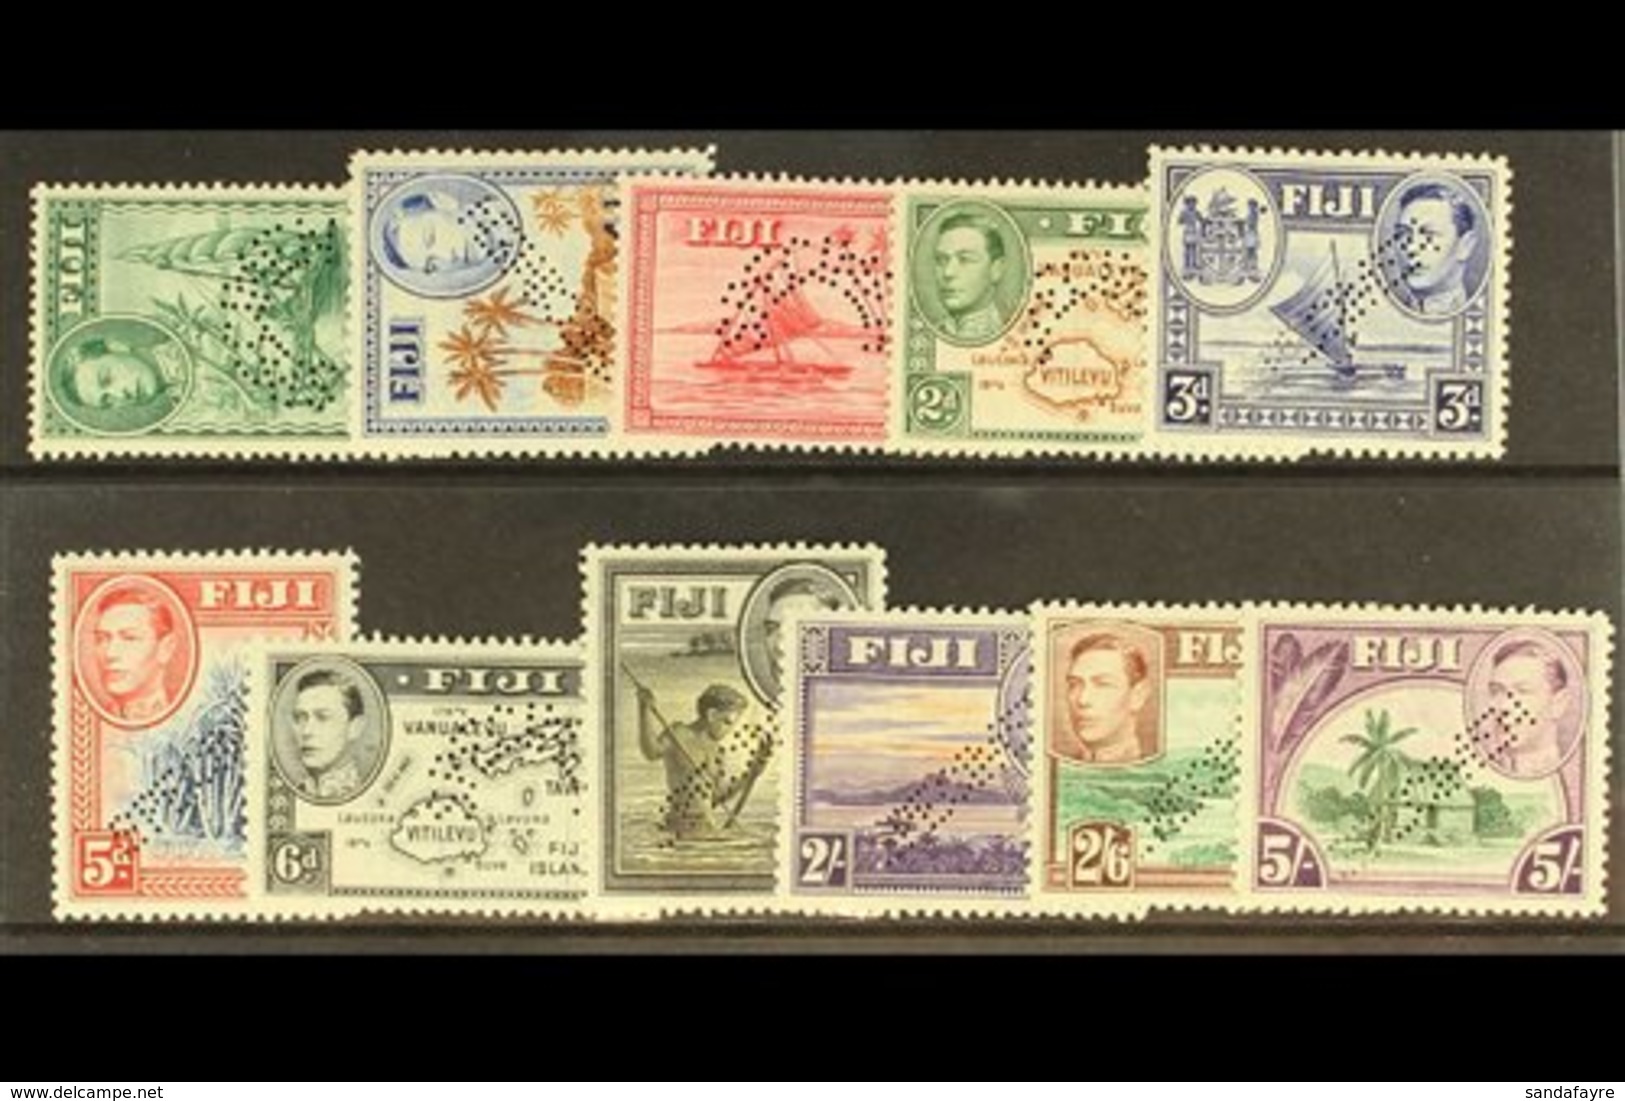 1938  The Original Set To 5s, Perf. "SPECIMEN", Very Fine Mint. (11 Stamps) For More Images, Please Visit Http://www.san - Fiji (...-1970)